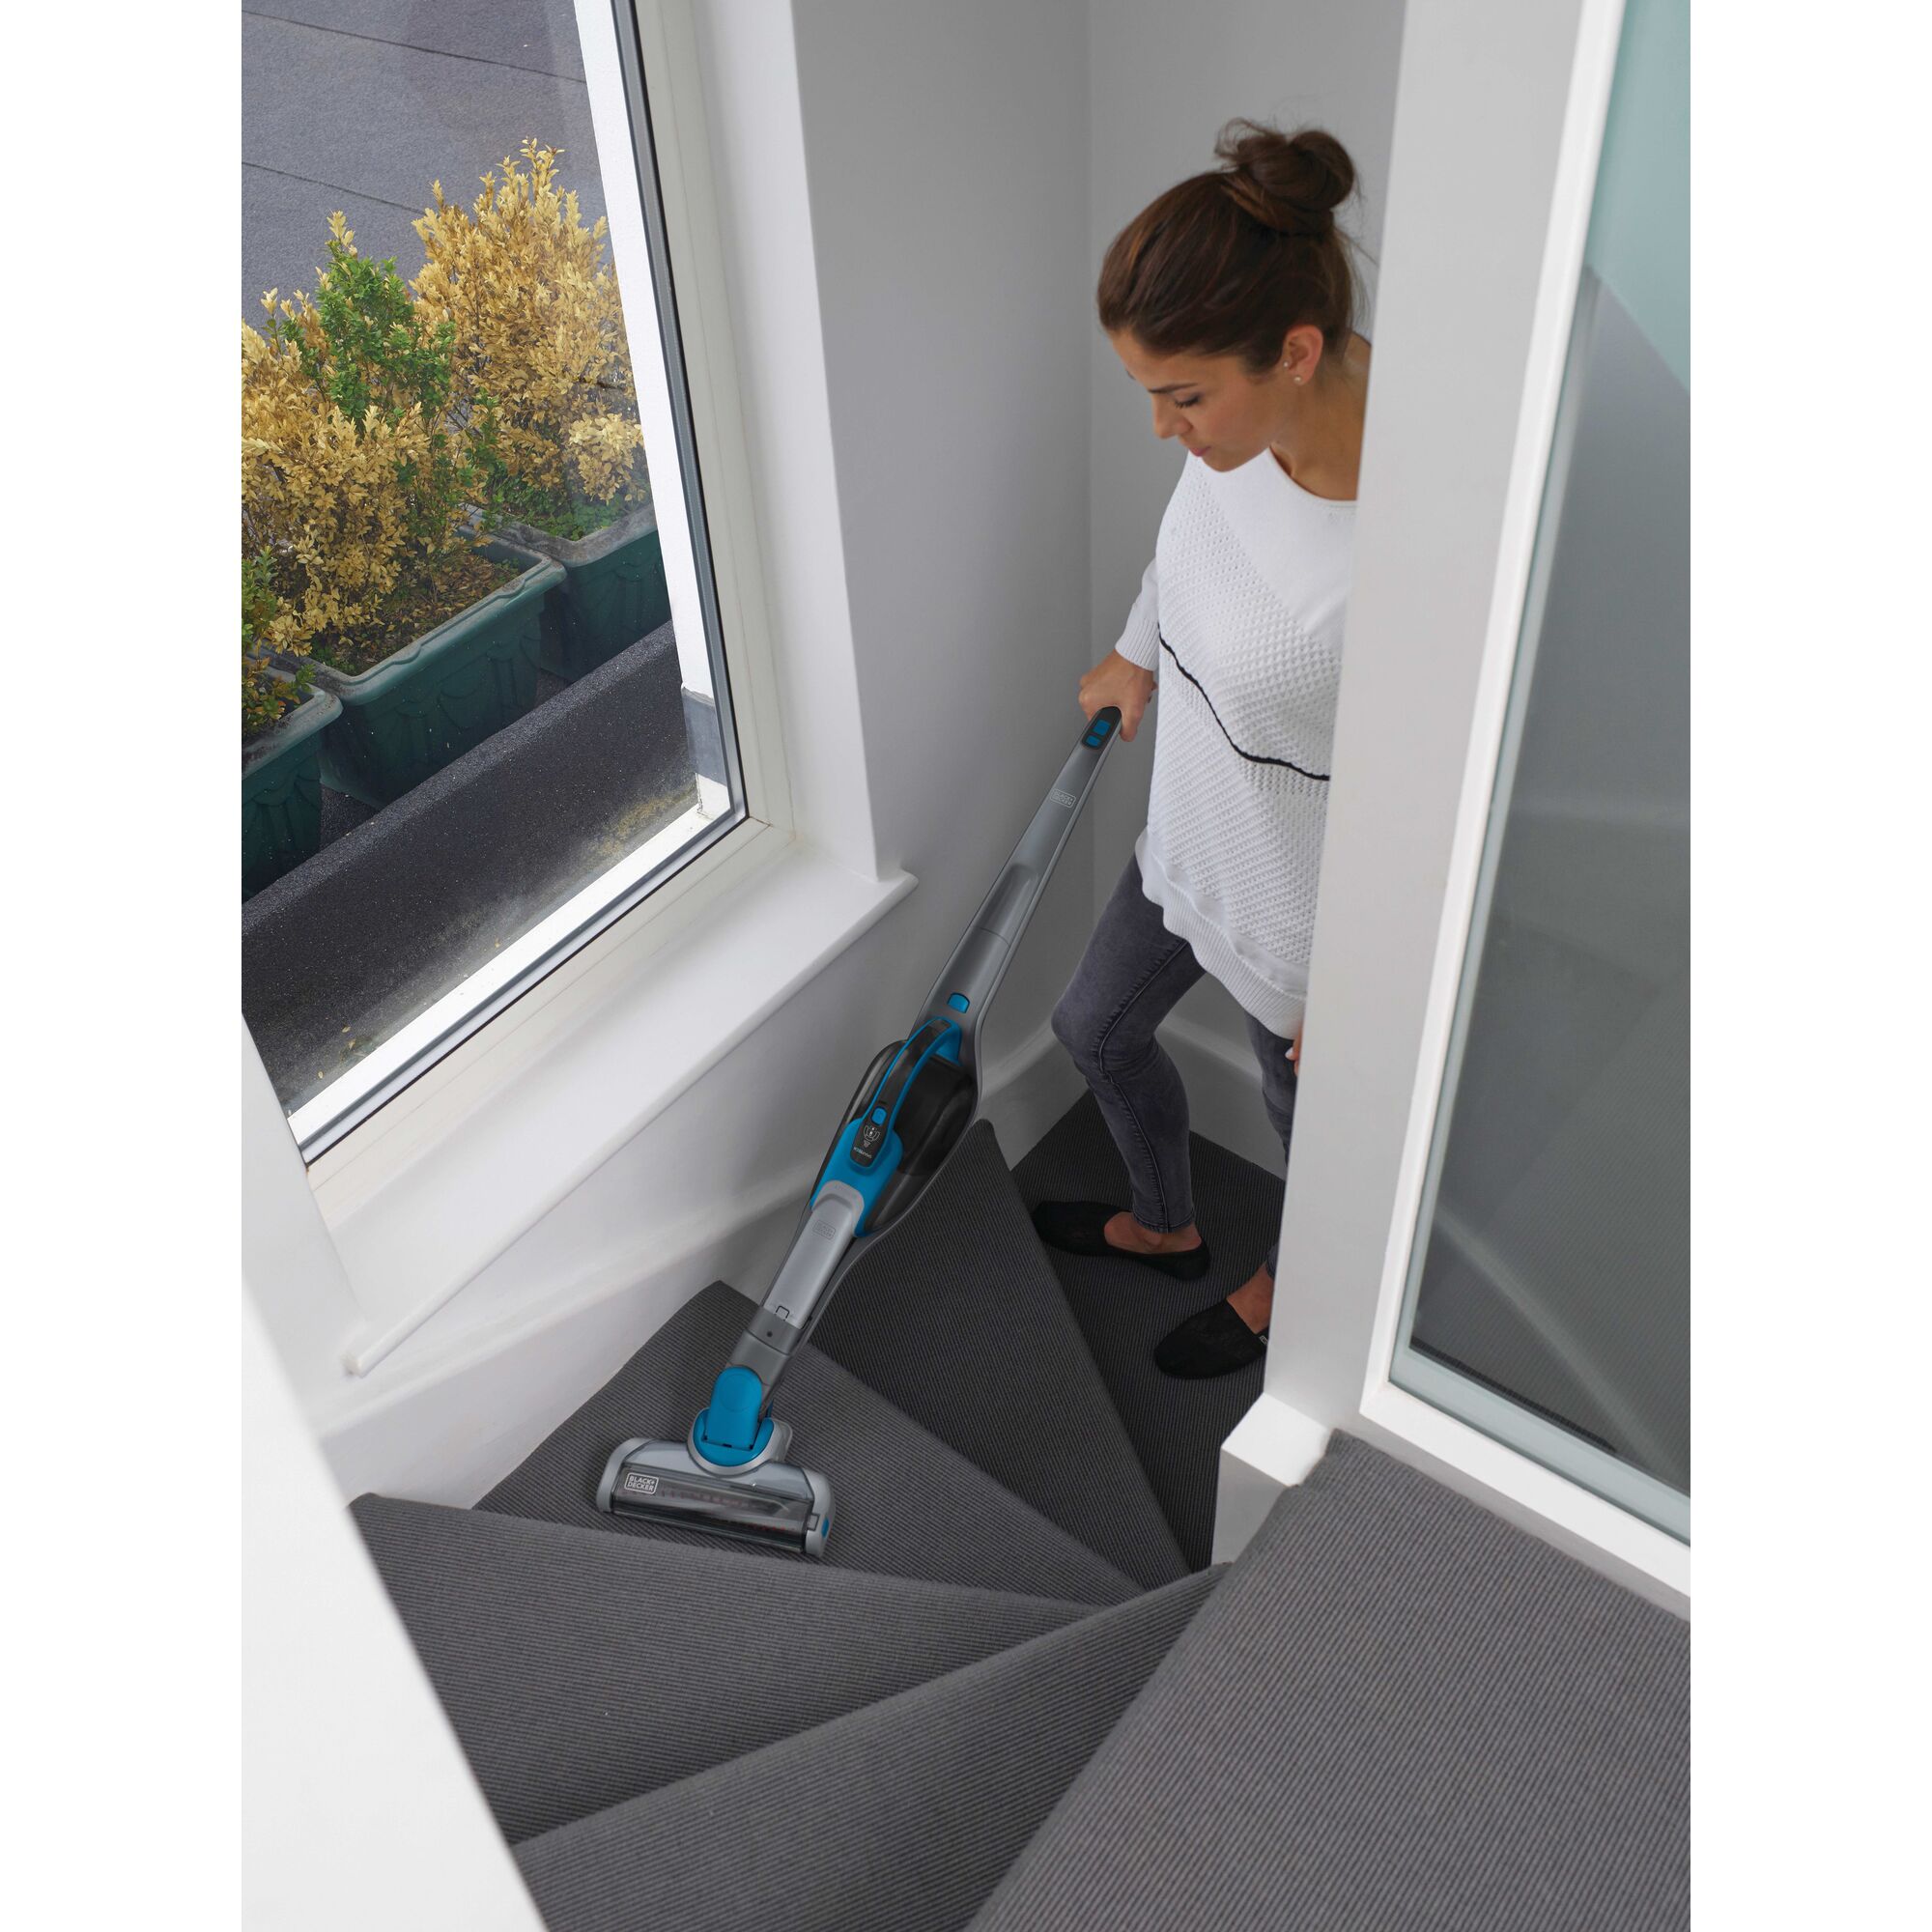 Cordless Lithium 2 in 1 Stick Vacuum being used for cleaning stairs.